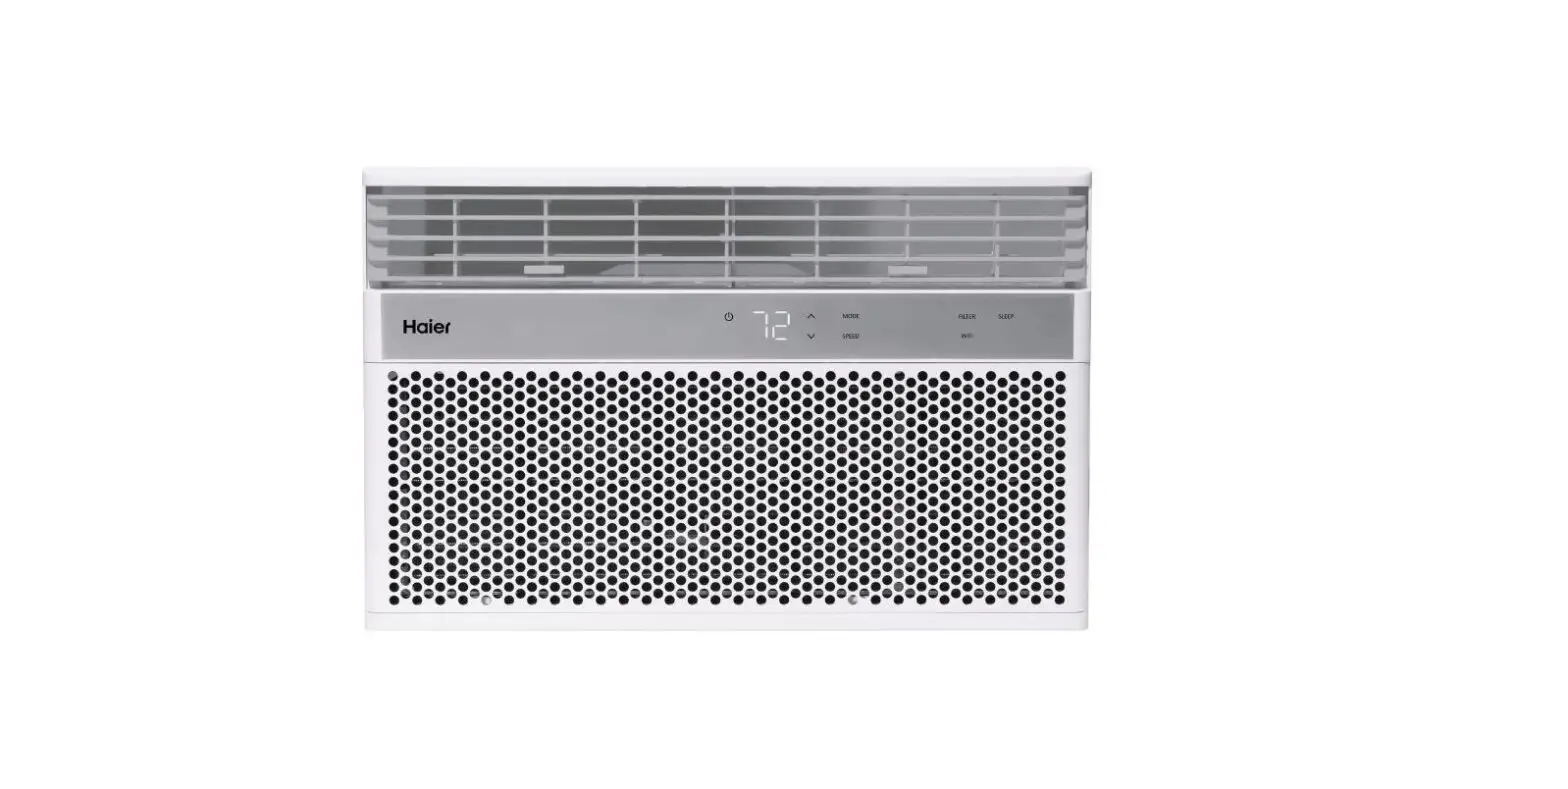 Haier QHNG08AA Room Air Conditioner Instruction Manual